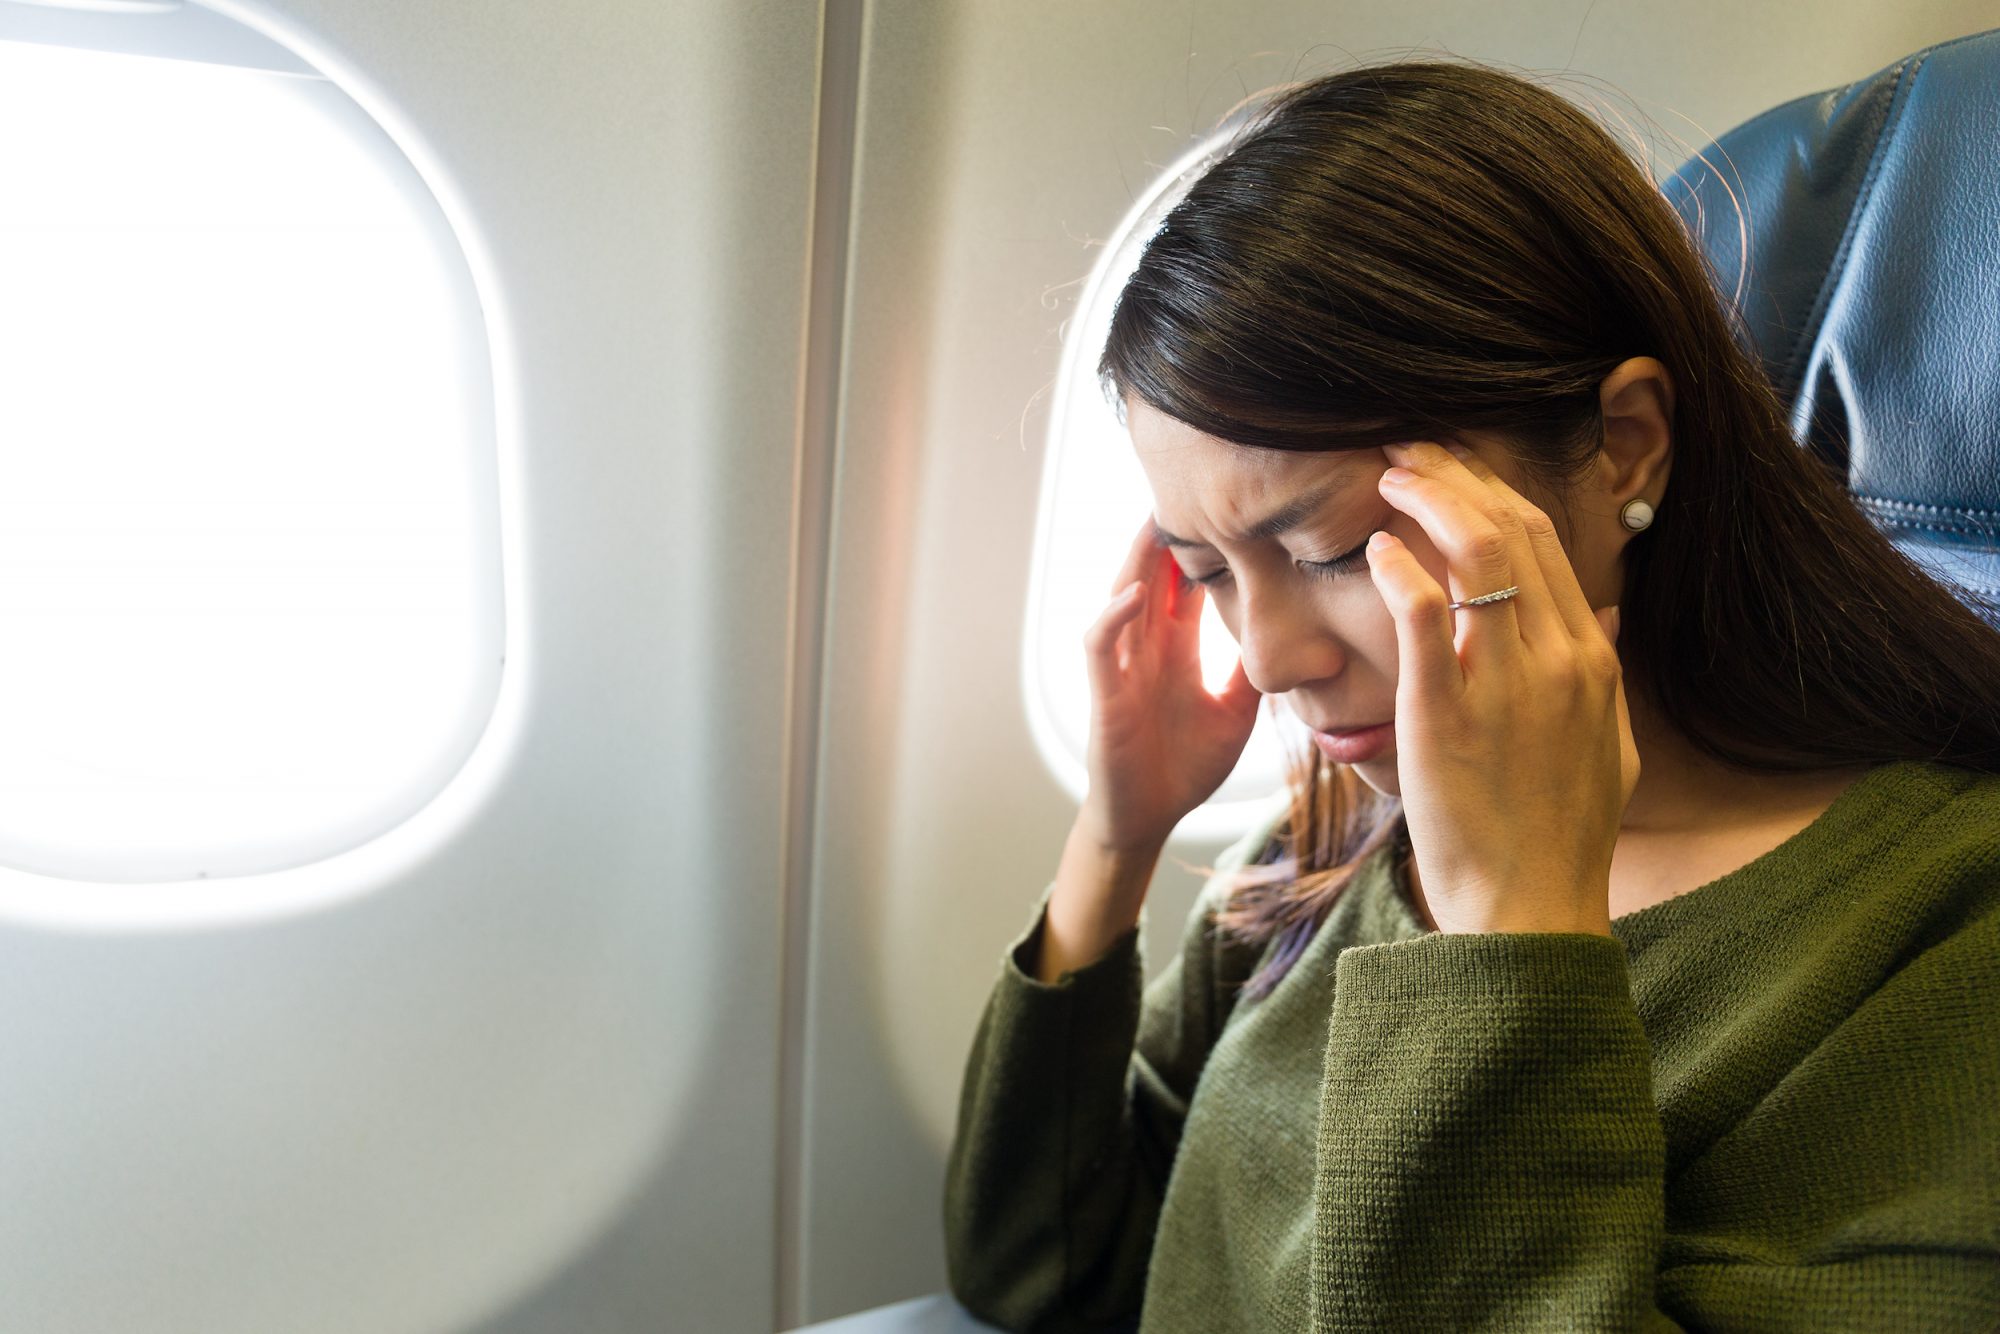 8 Tips to Avoid Motion Sickness and Nausea While Traveling